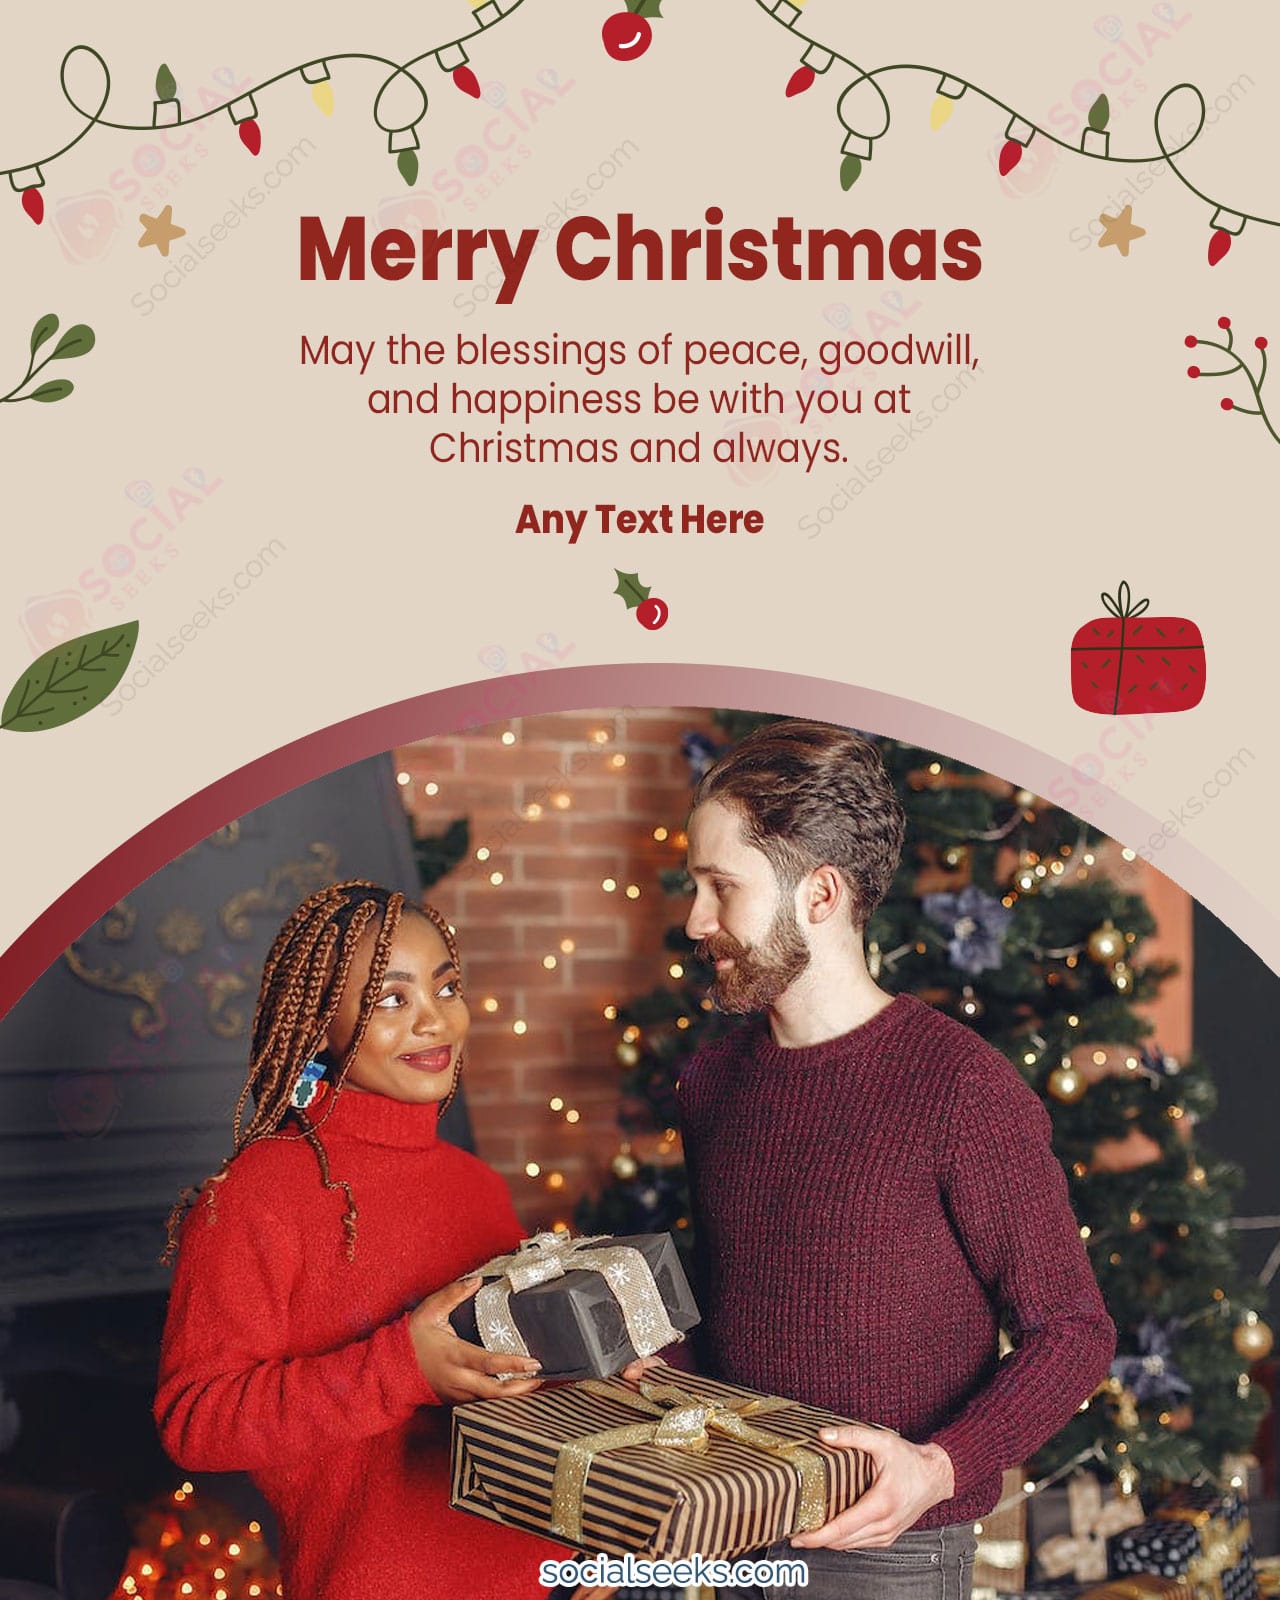 Xmas Greeting Cards With Customized Images